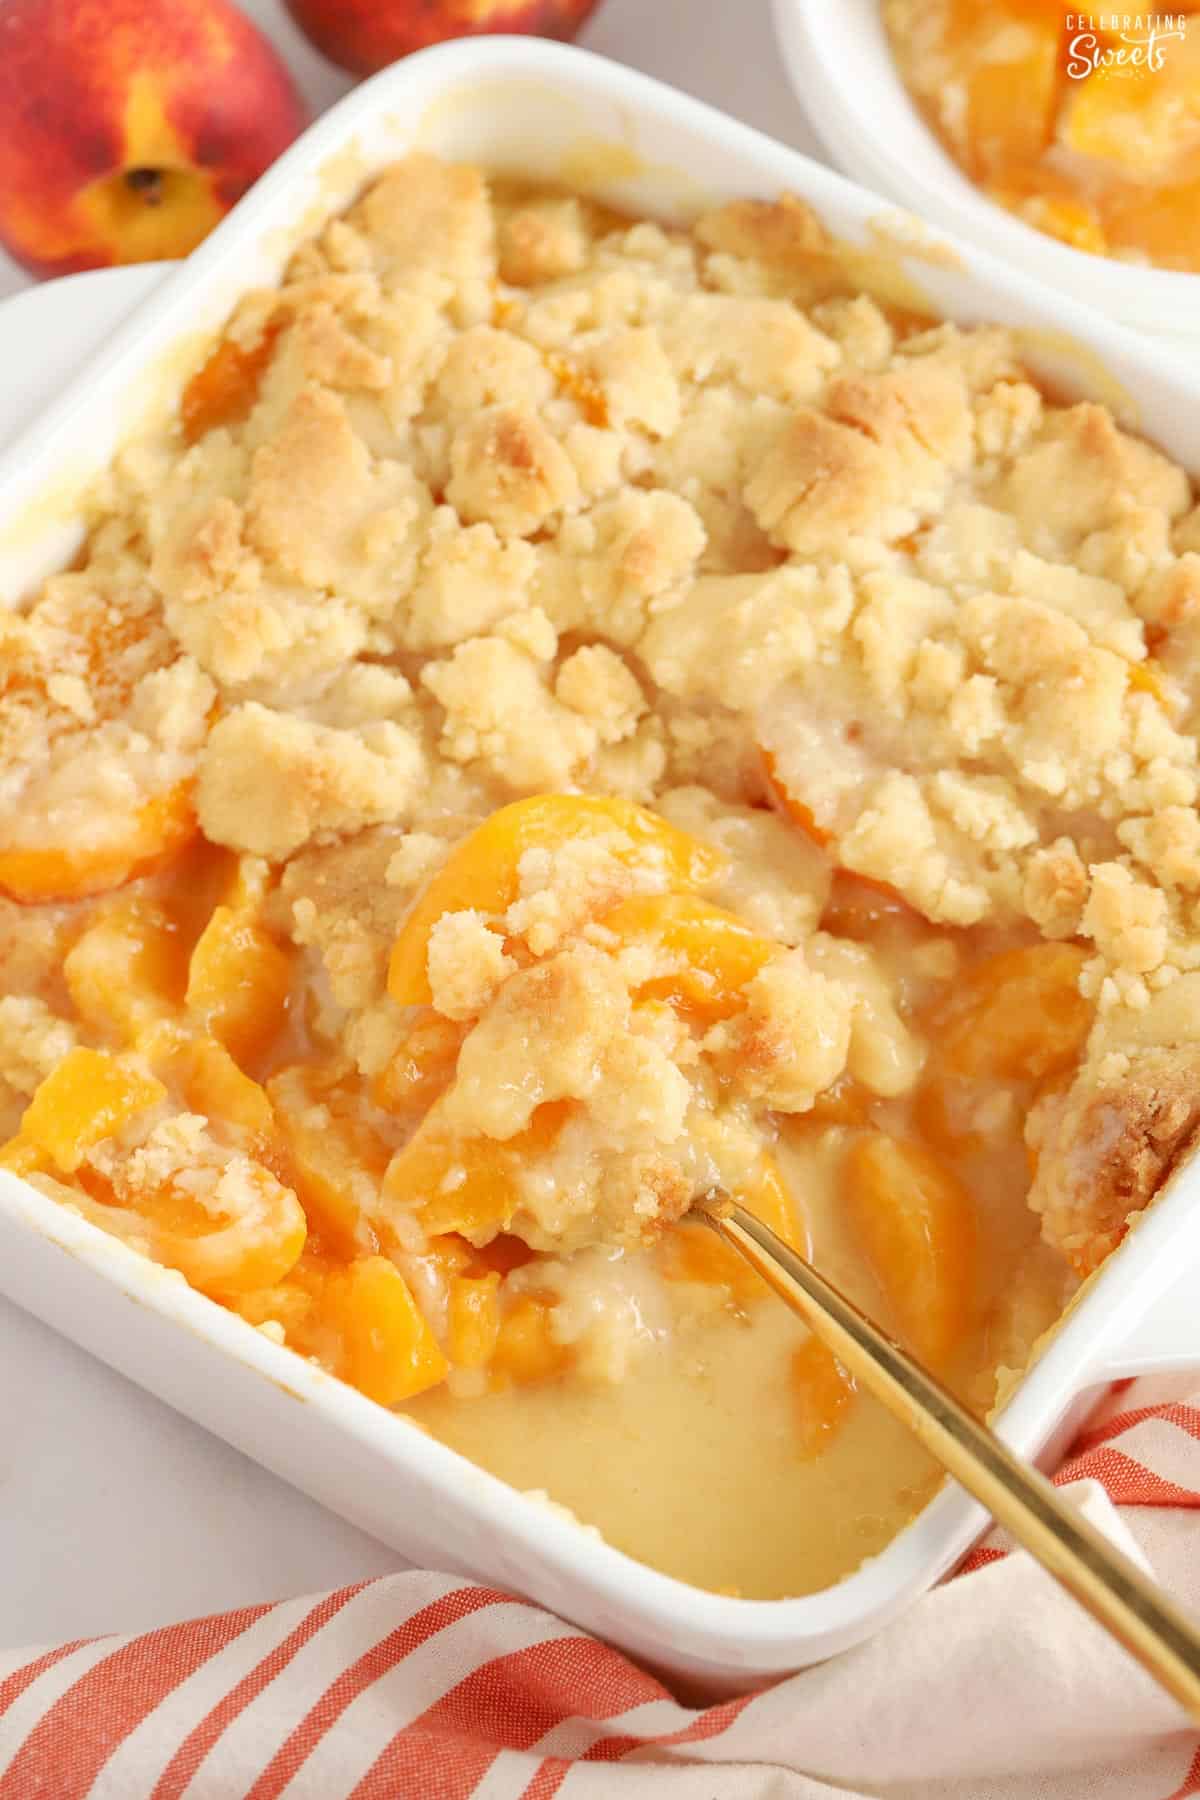 Peach Cobbler in a white baking dish with a gold spoon.